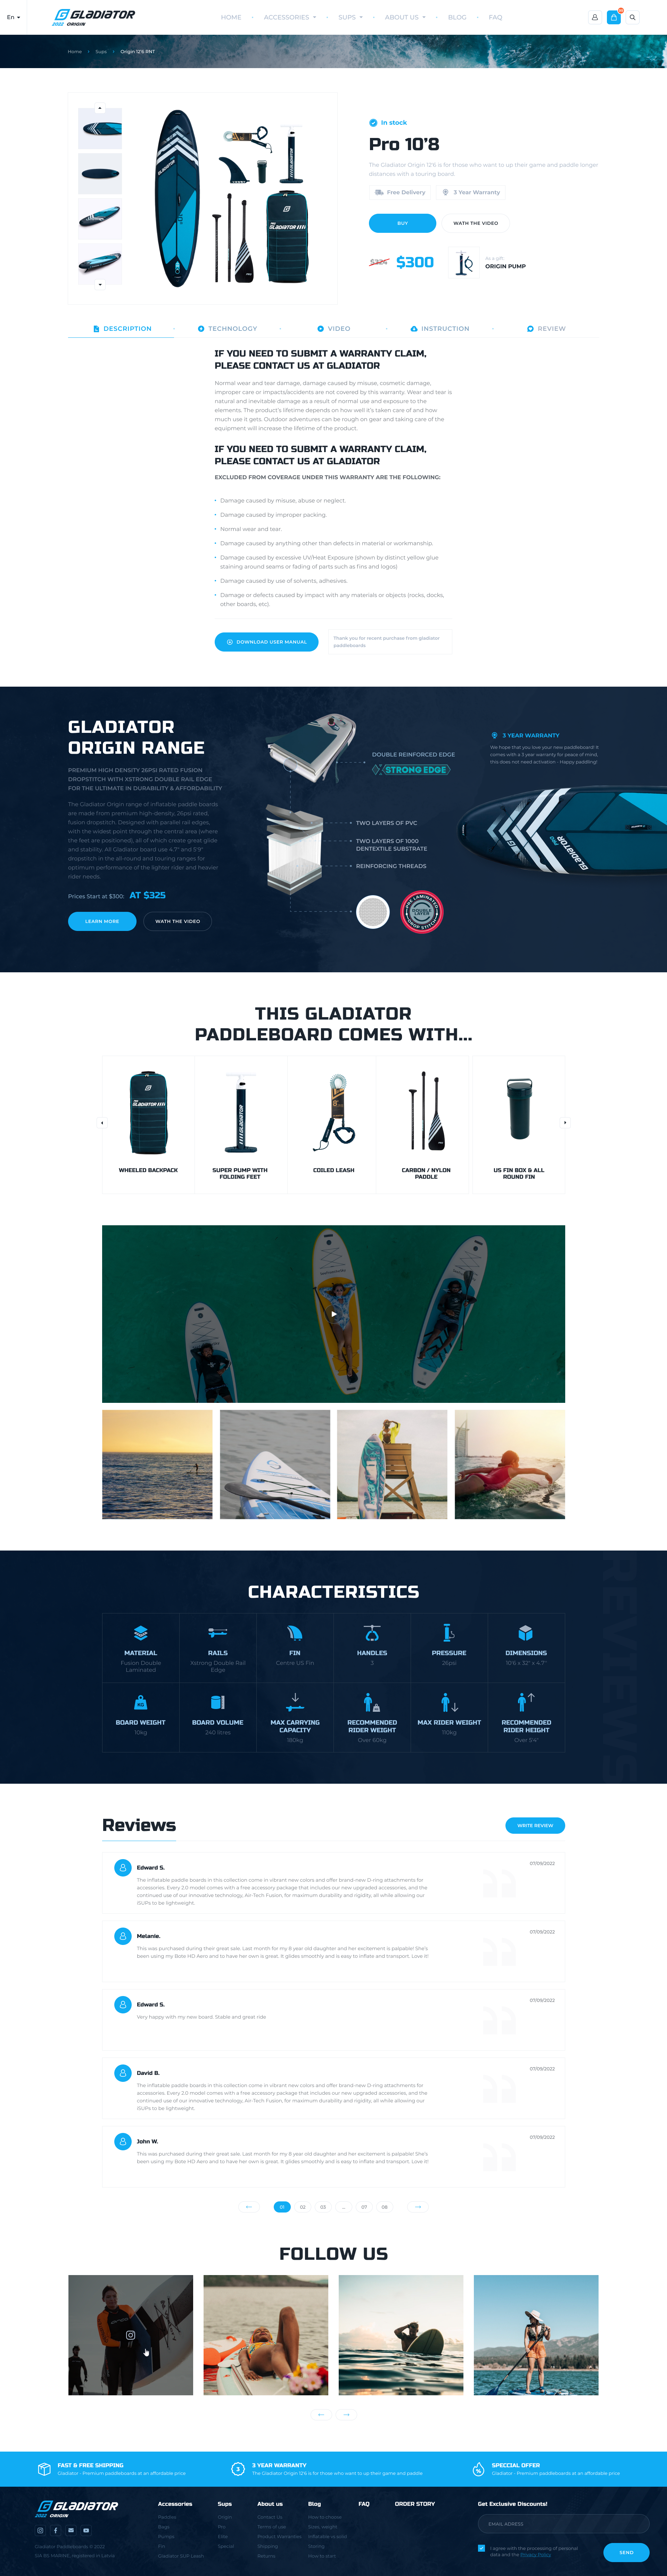 Gladiator Paddleboards_03_Sups_Product_Card_0.1